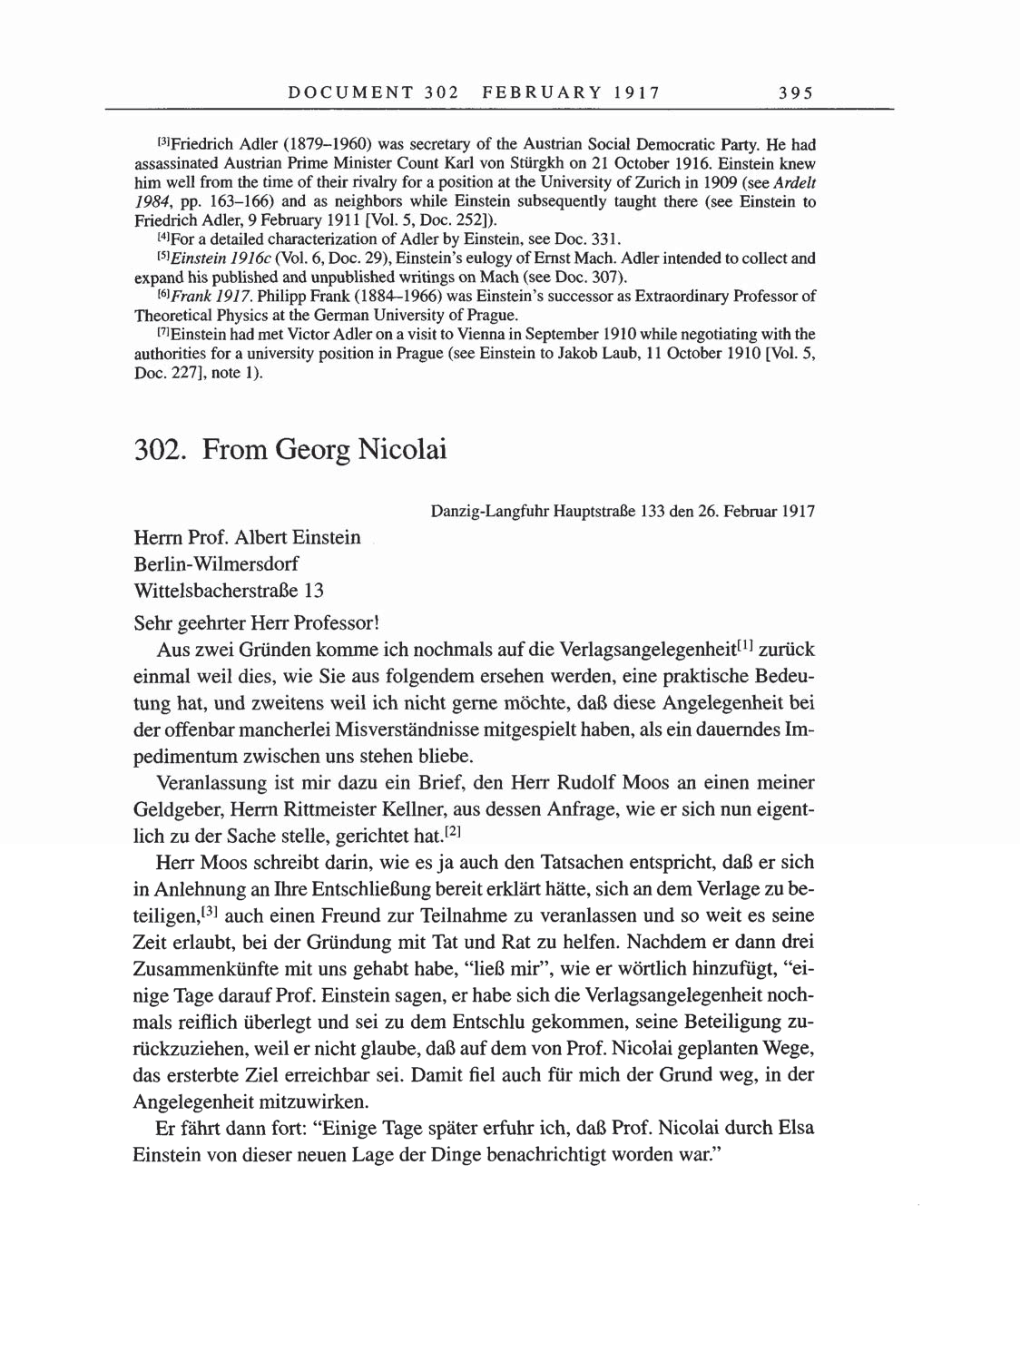 Volume 8, Part A: The Berlin Years: Correspondence 1914-1917 page 395